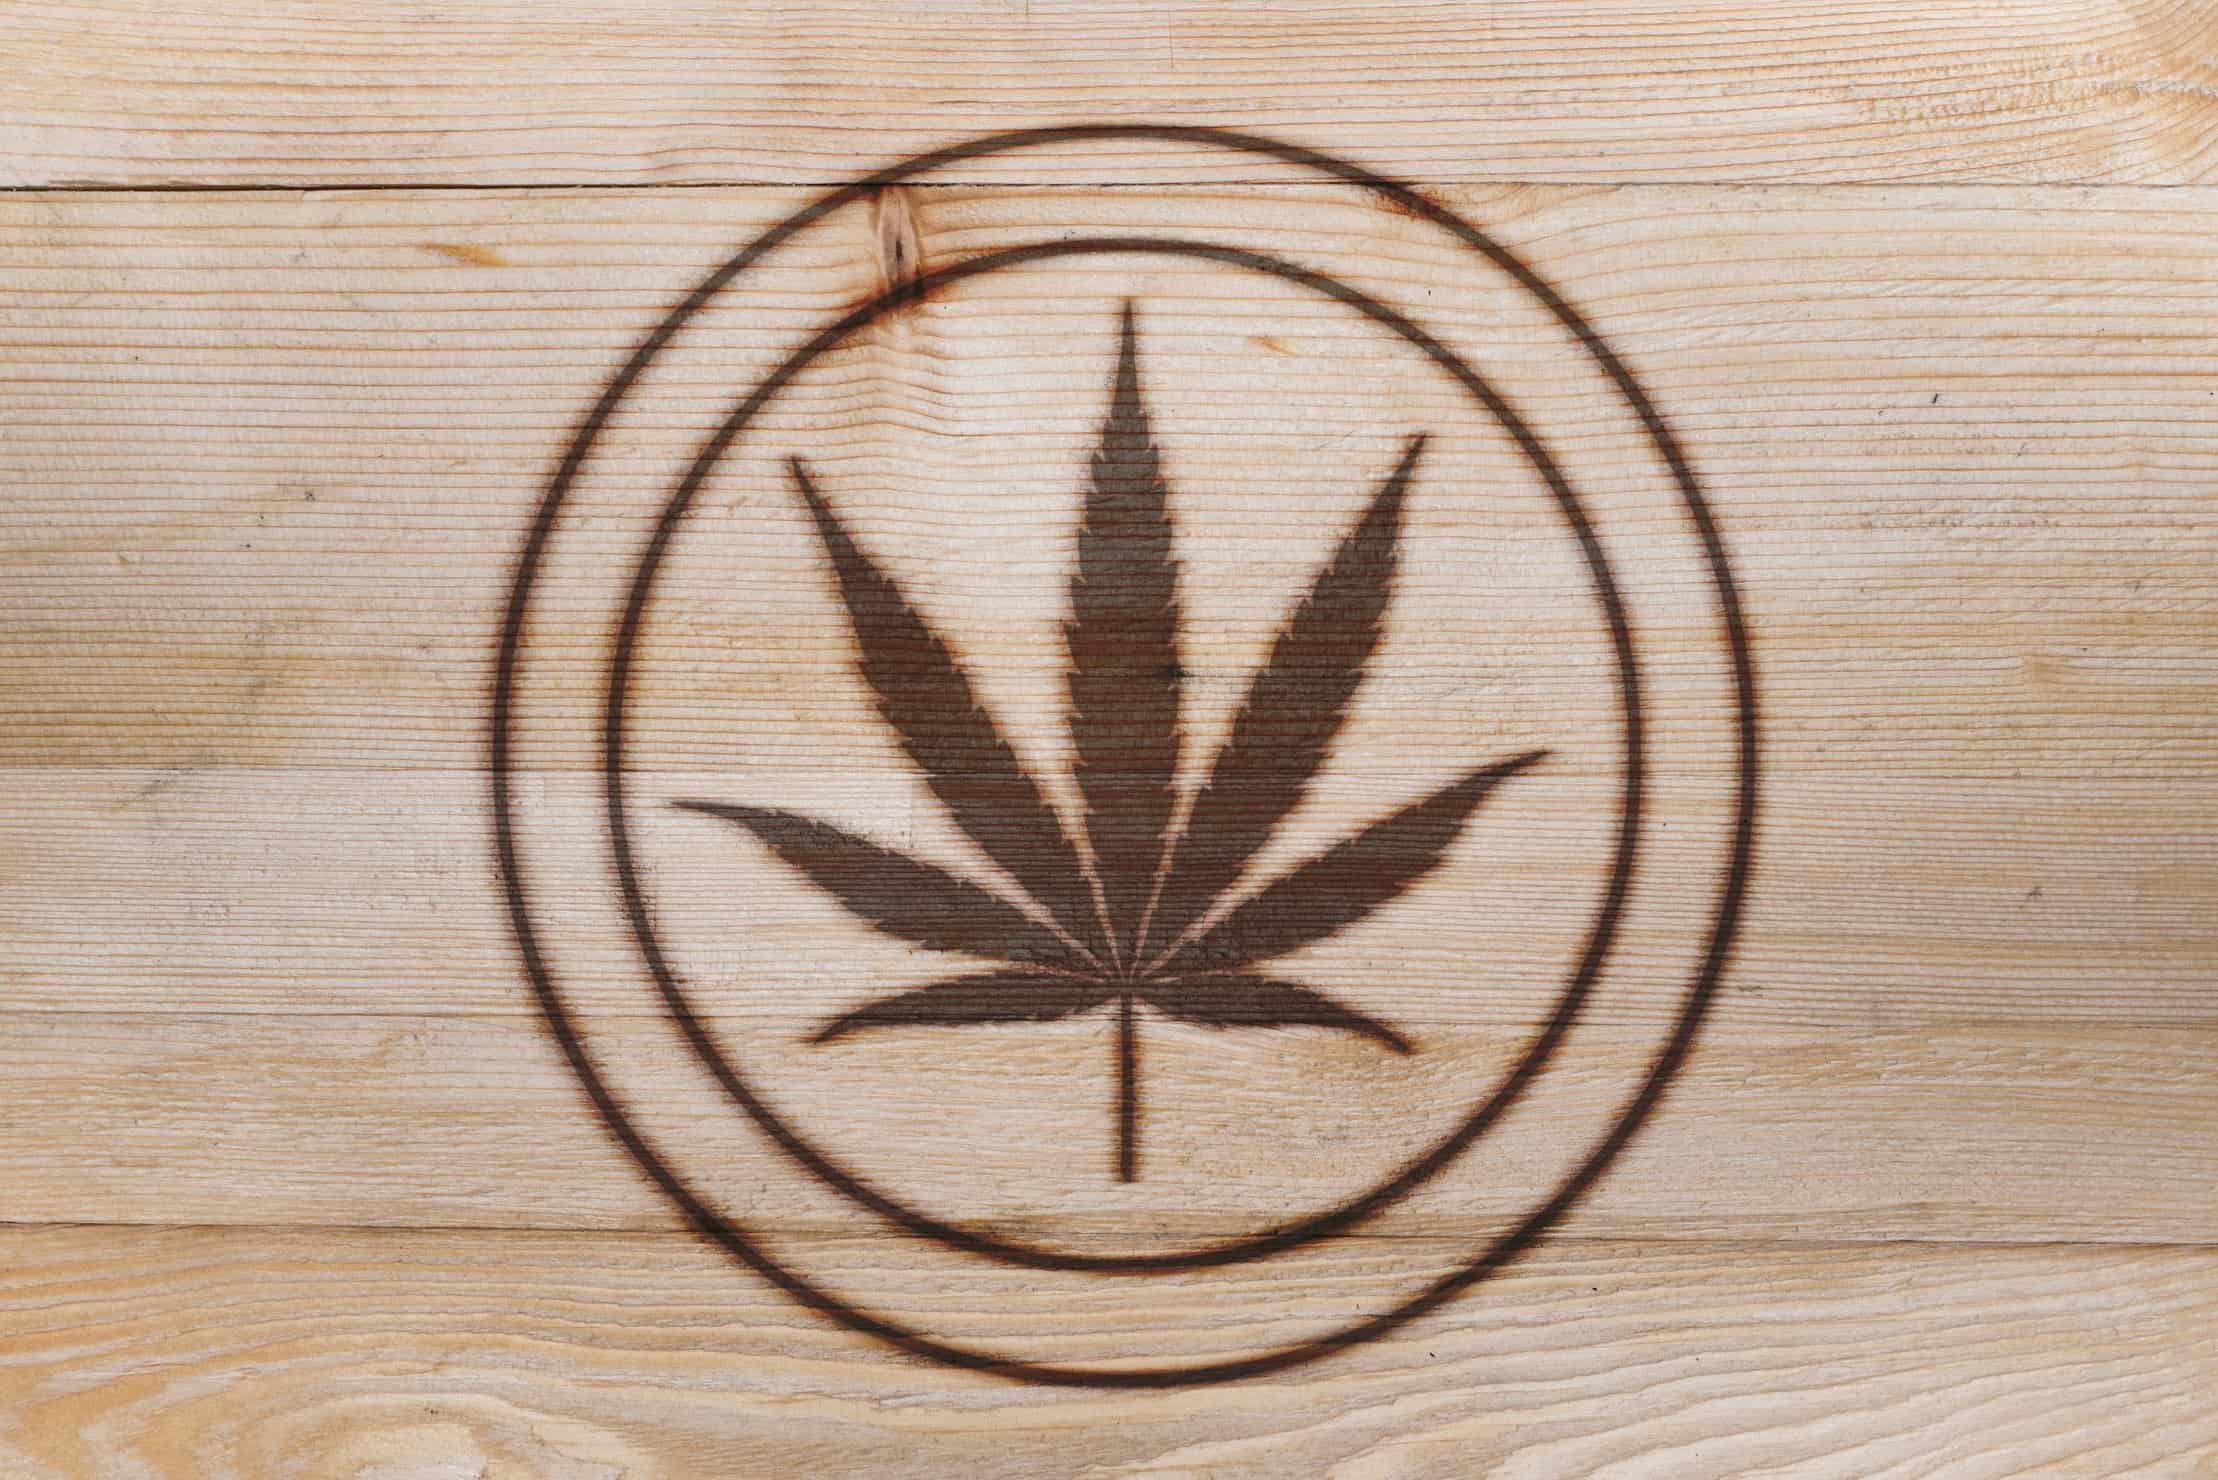 Build Your Marijuana Brand: An Interview with Budd Branding. Weed symbol on a wood surface.